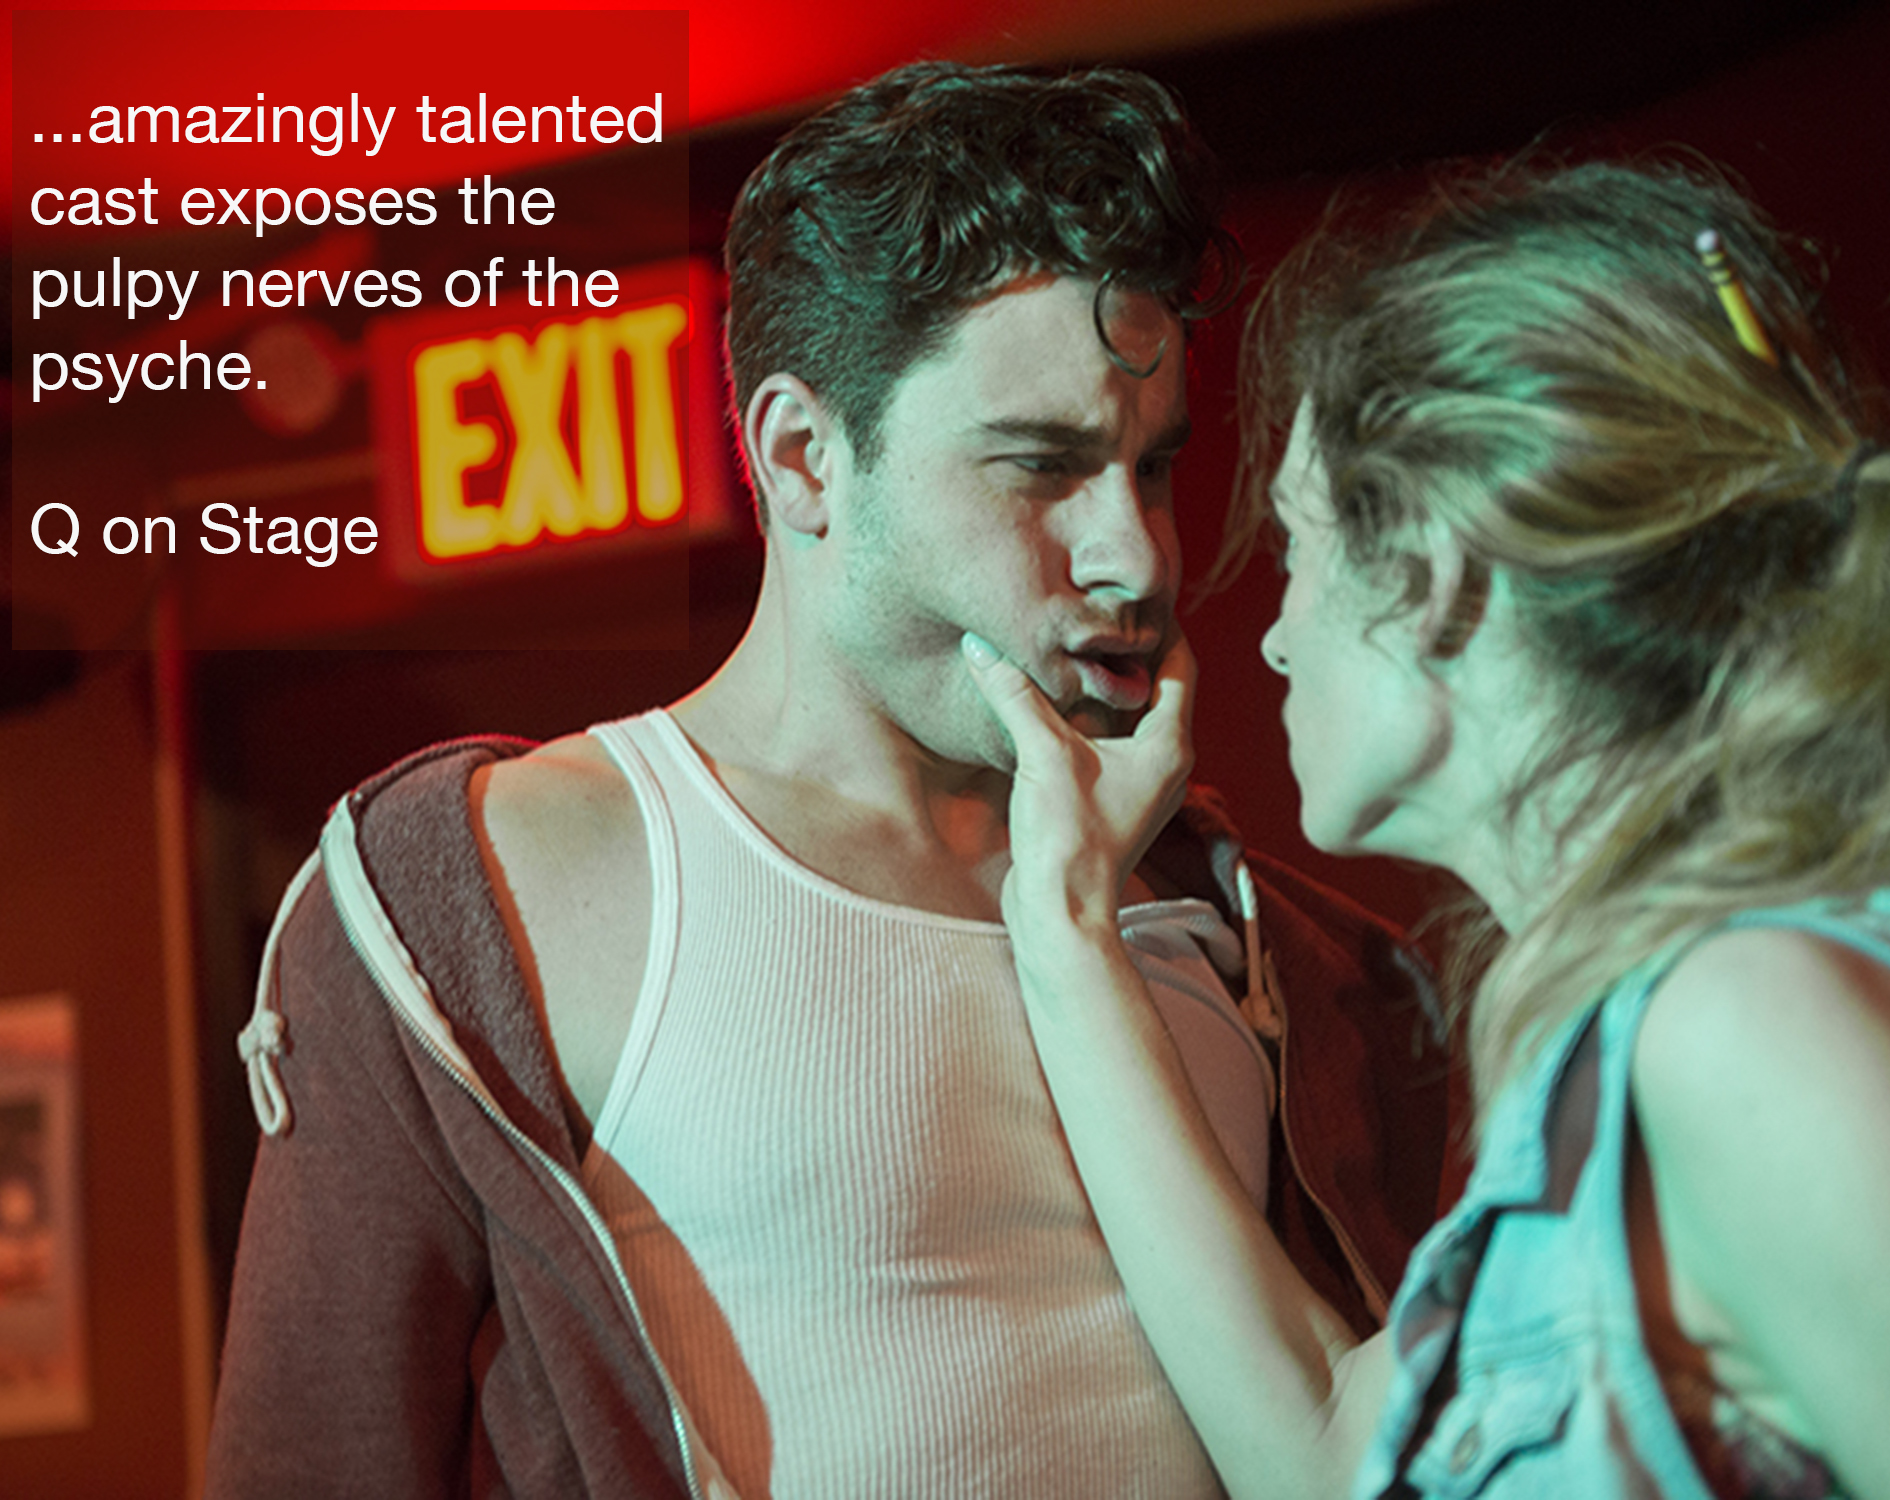  Woman aggressively grabbing man’s face with press quote “…amazingly talented cast exposes the pulpy nerves of the psyche.” -  Sherri Rase, Q on Stage  